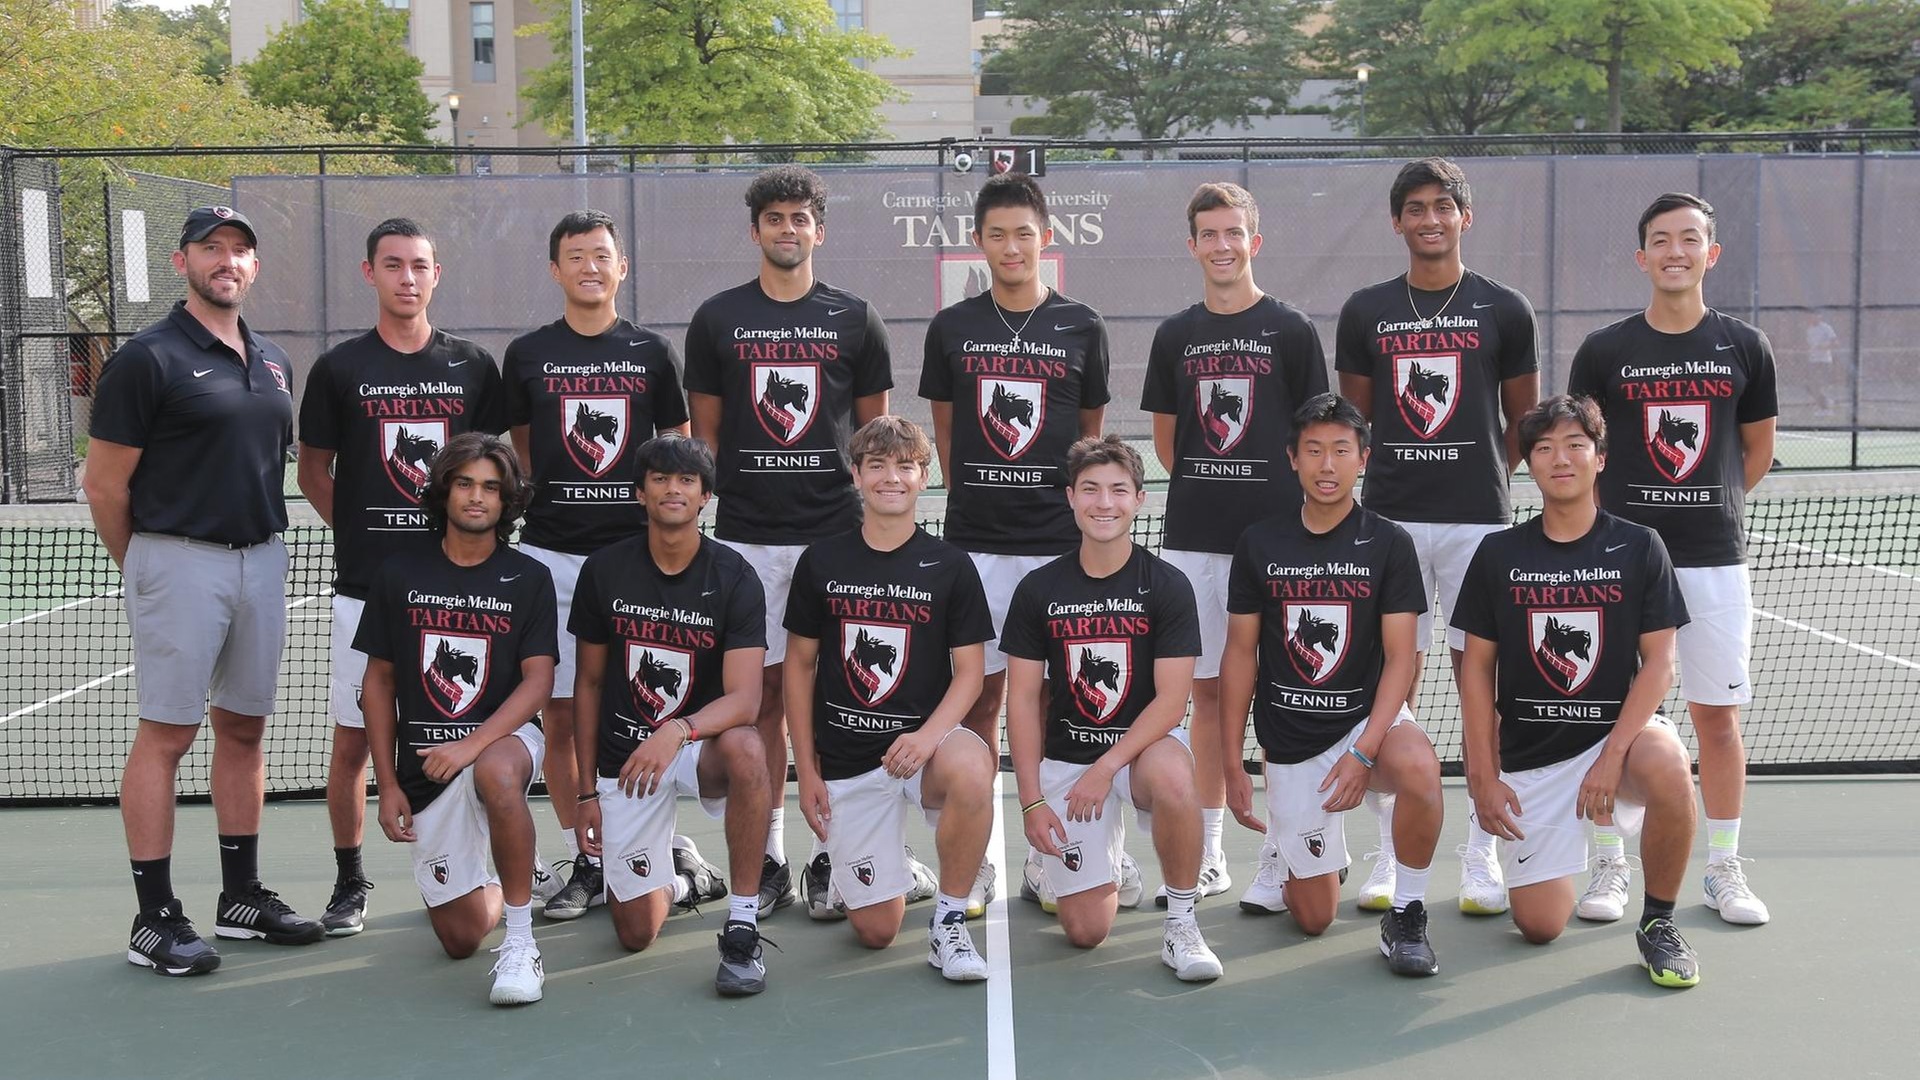 men's tennis team photo with players wearing black shirts and white shorts with one row kneeling and one row standing